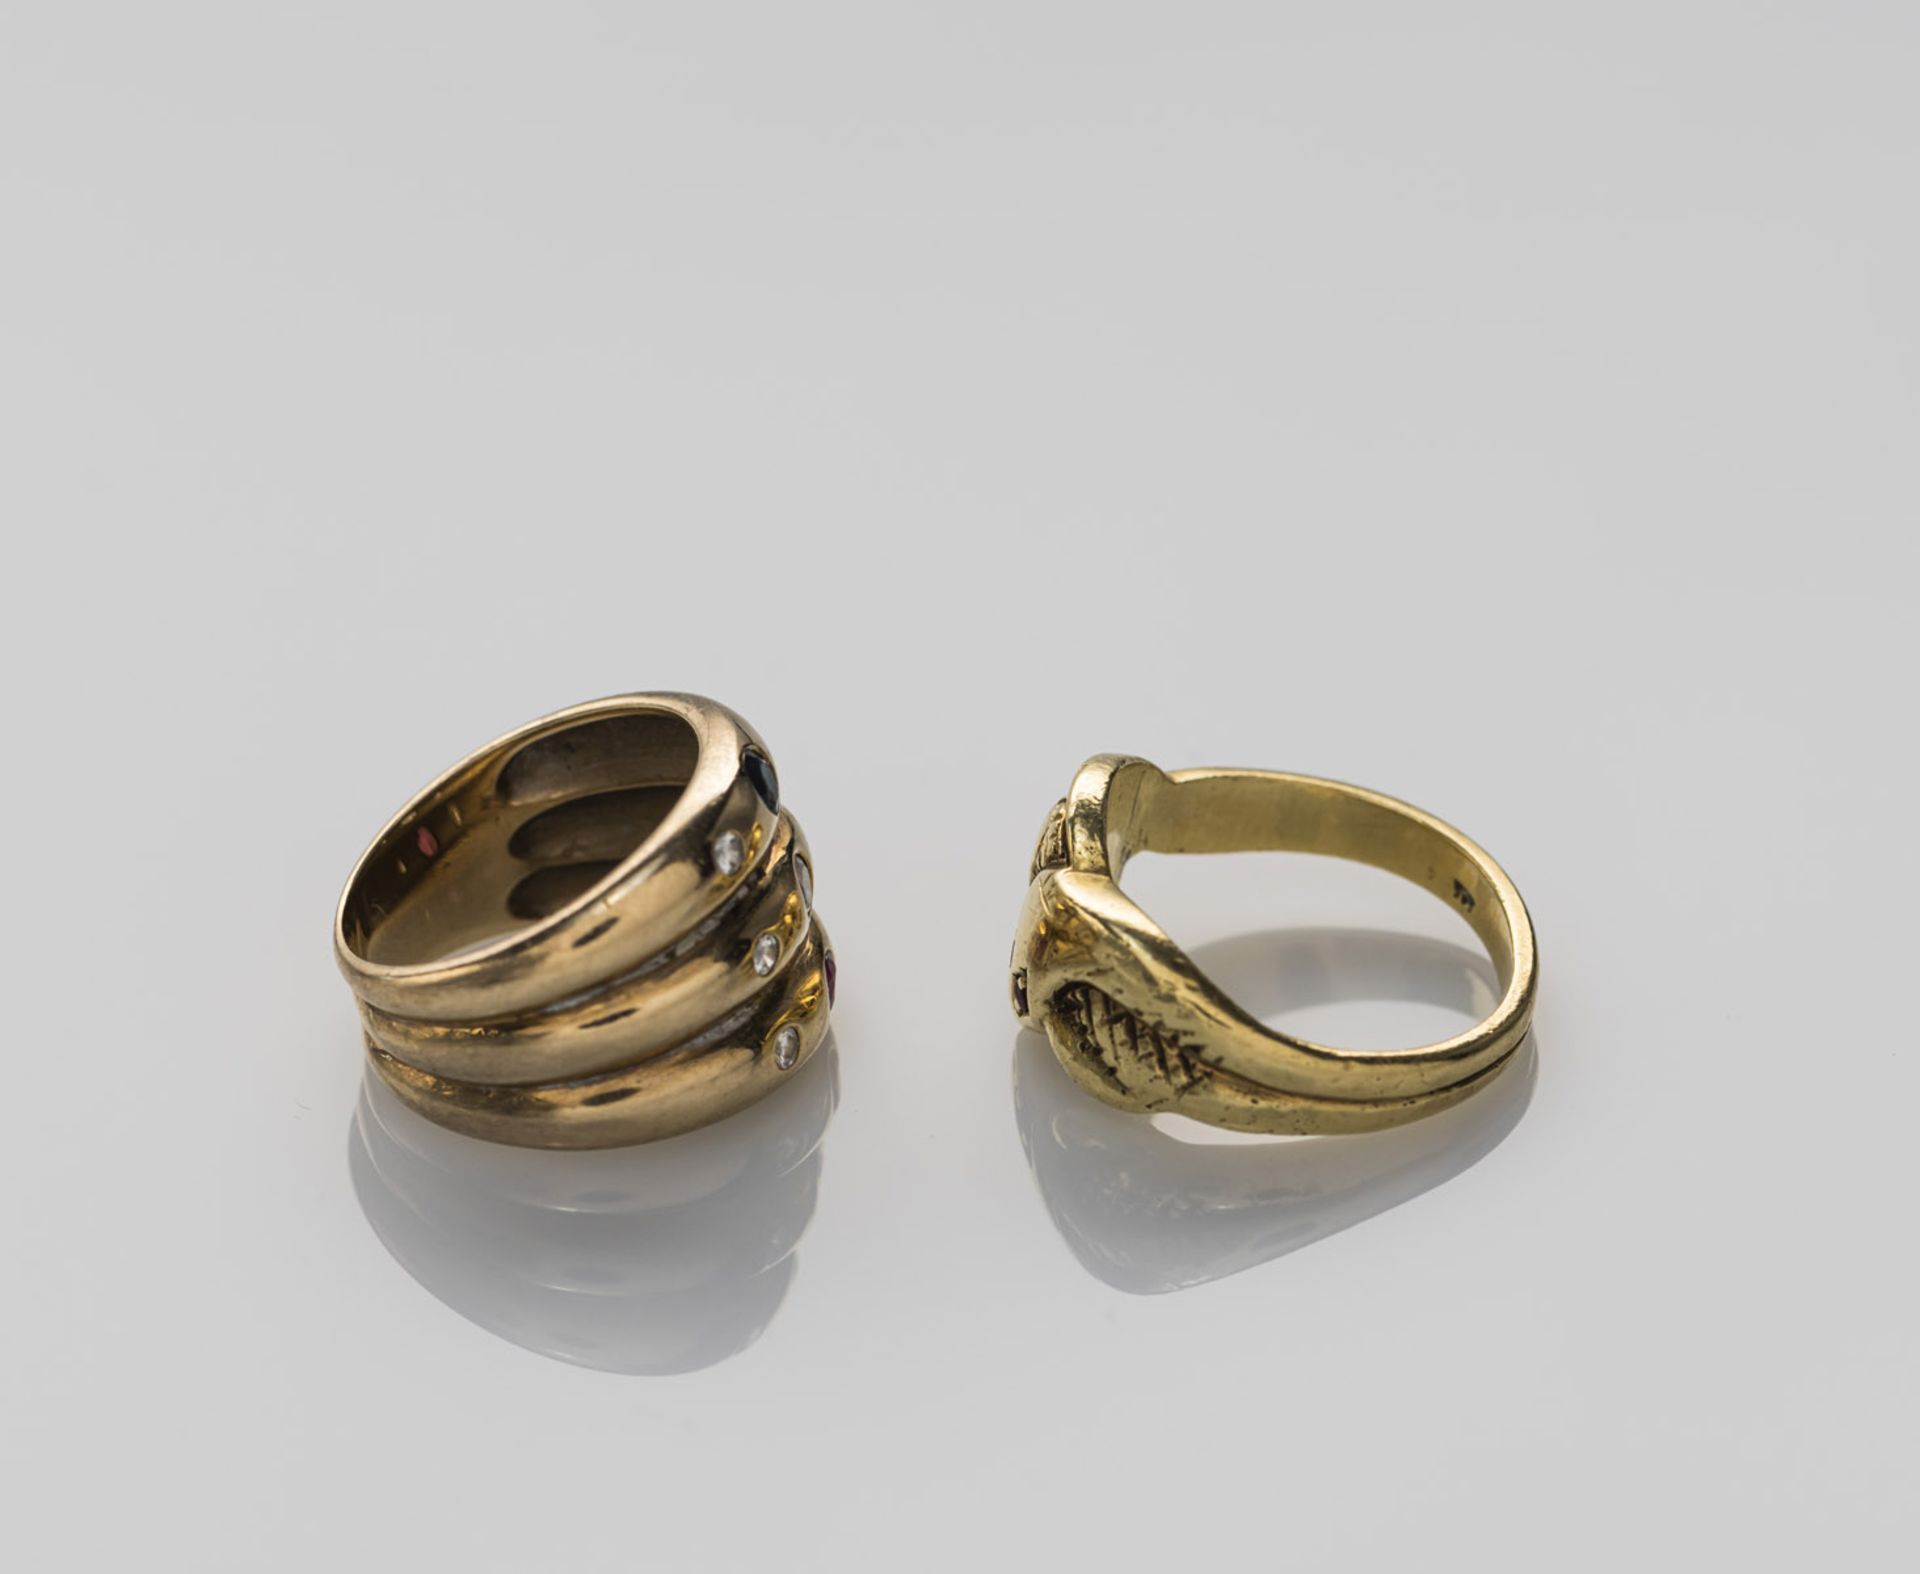 TWO GOLD RINGS - Image 2 of 4